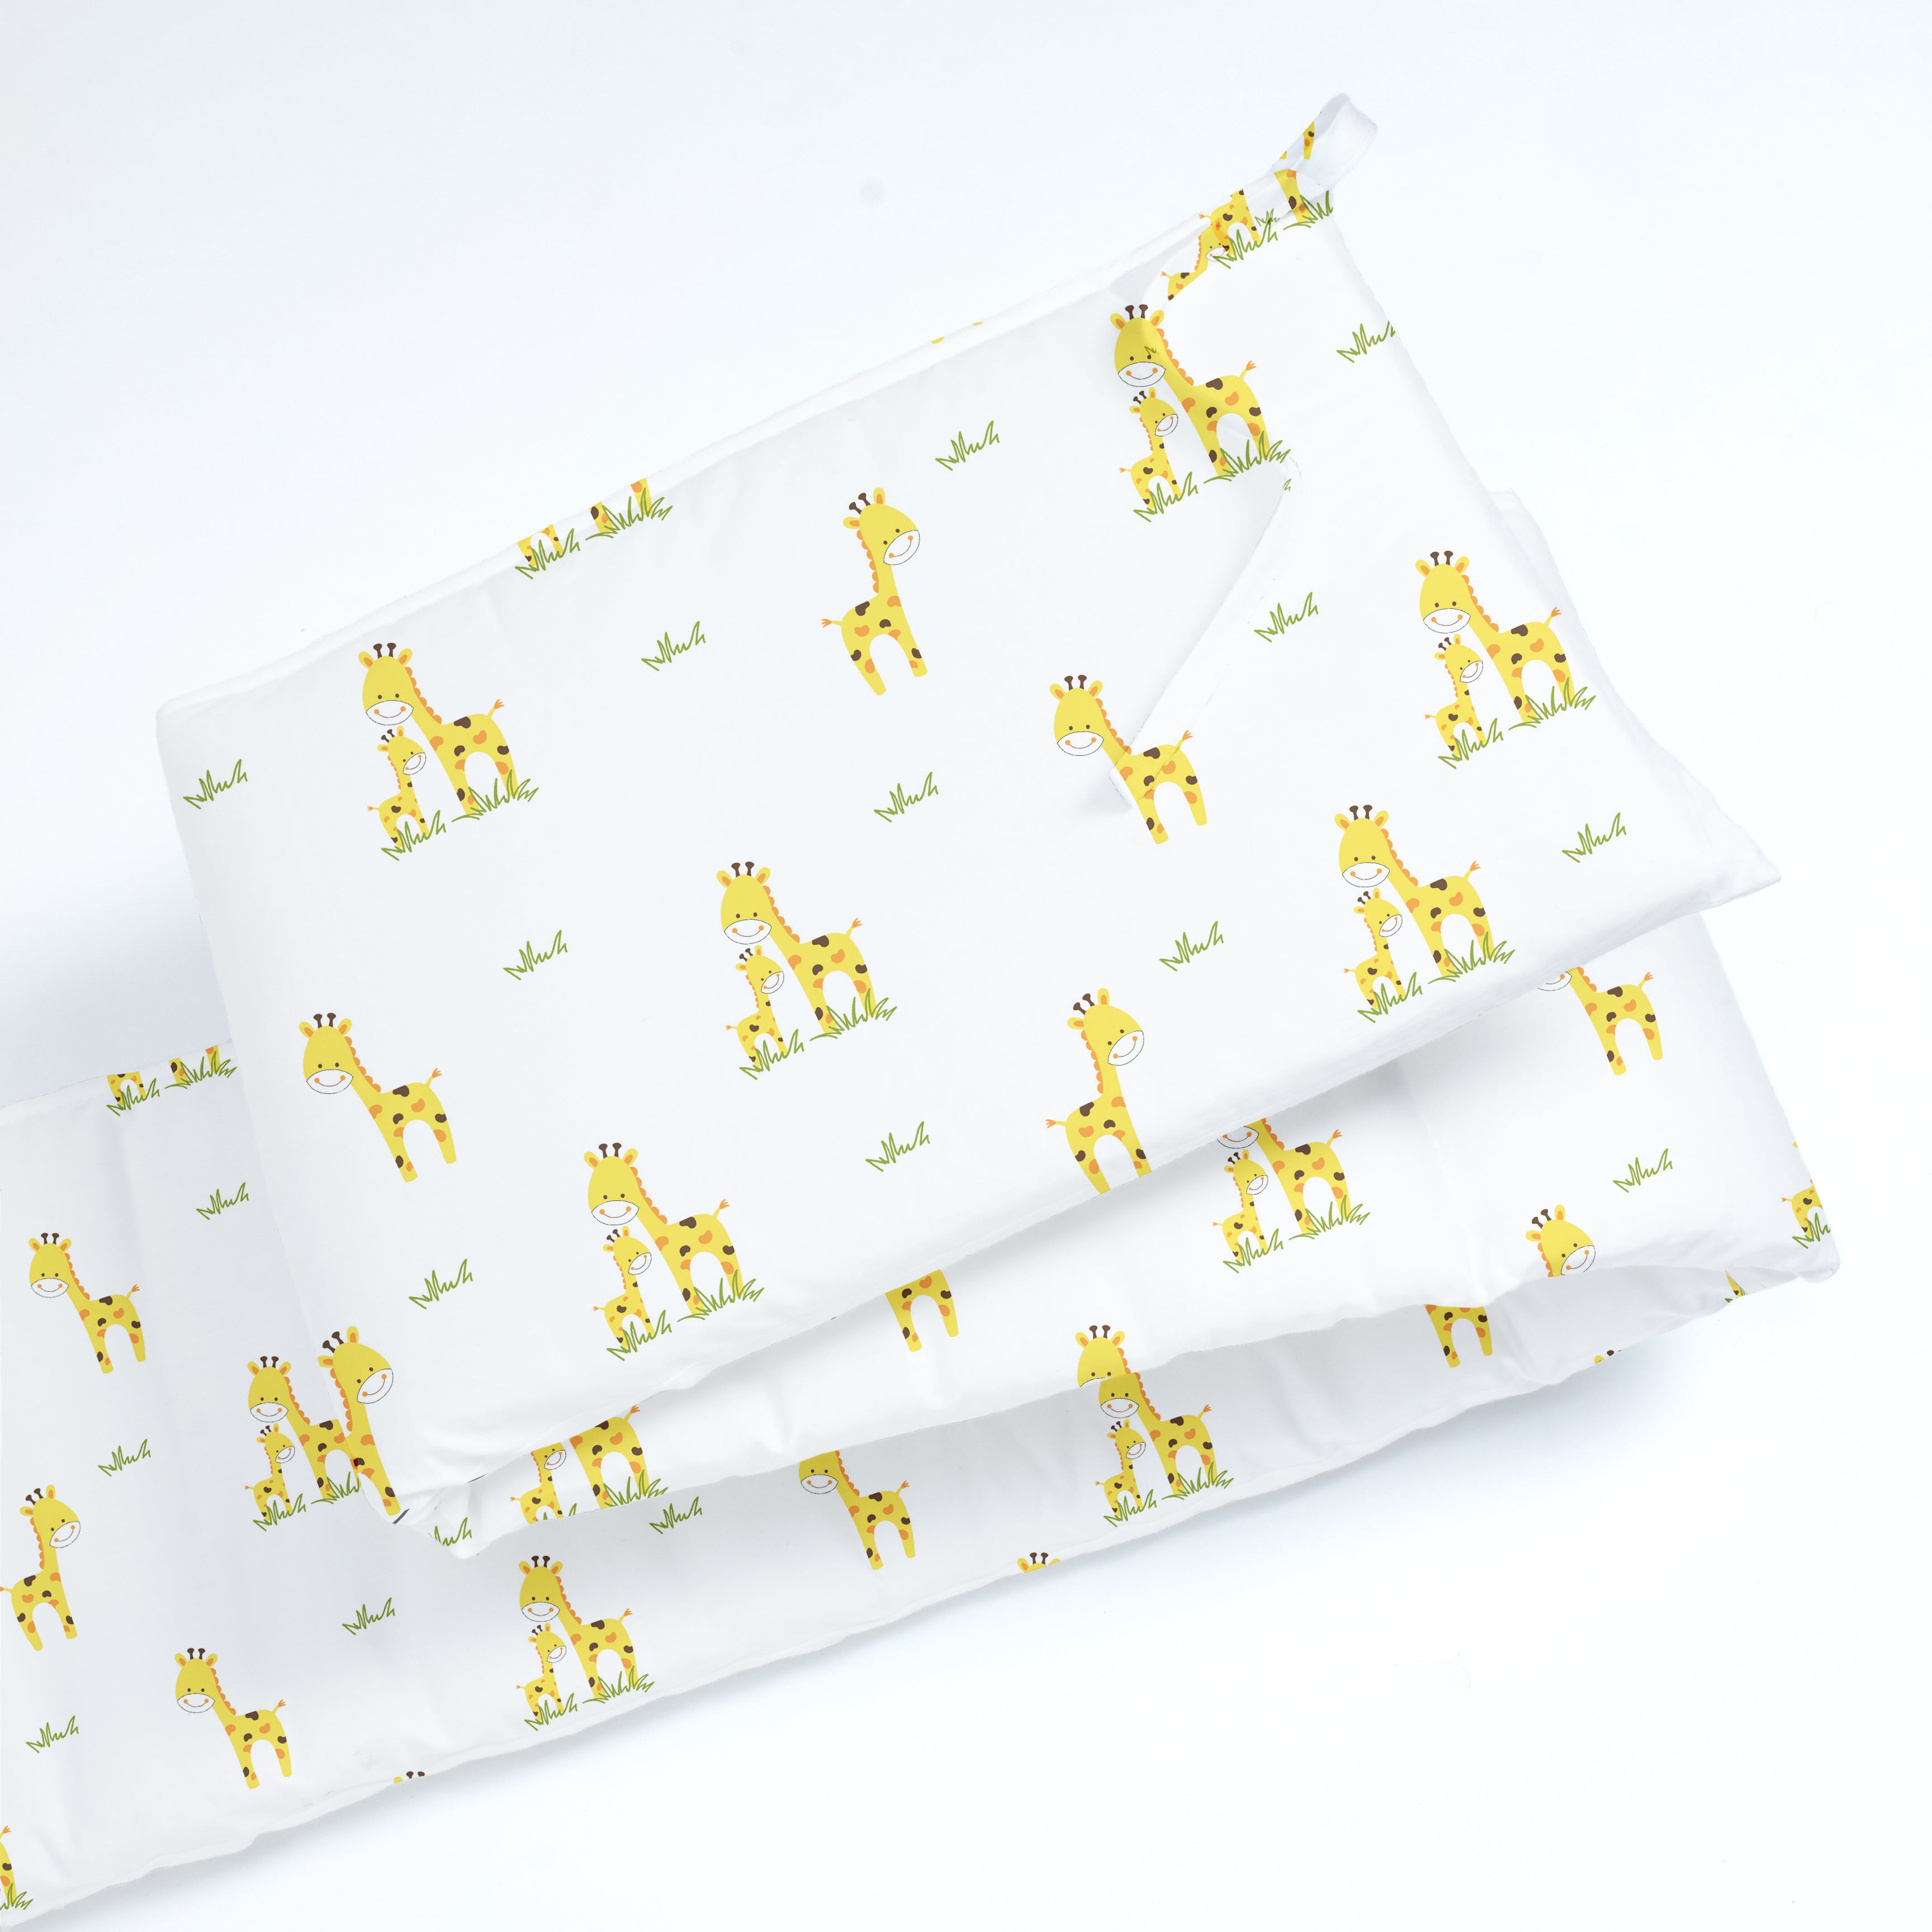 The White Cradle Baby Safe Cot Bumper Pad, Fits all Standard Cribs, Thick Padded Protective Liner for Child Nursery Bed, Soft Organic Cotton Fabric, Breathable, Non-Allergenic - Giraffe